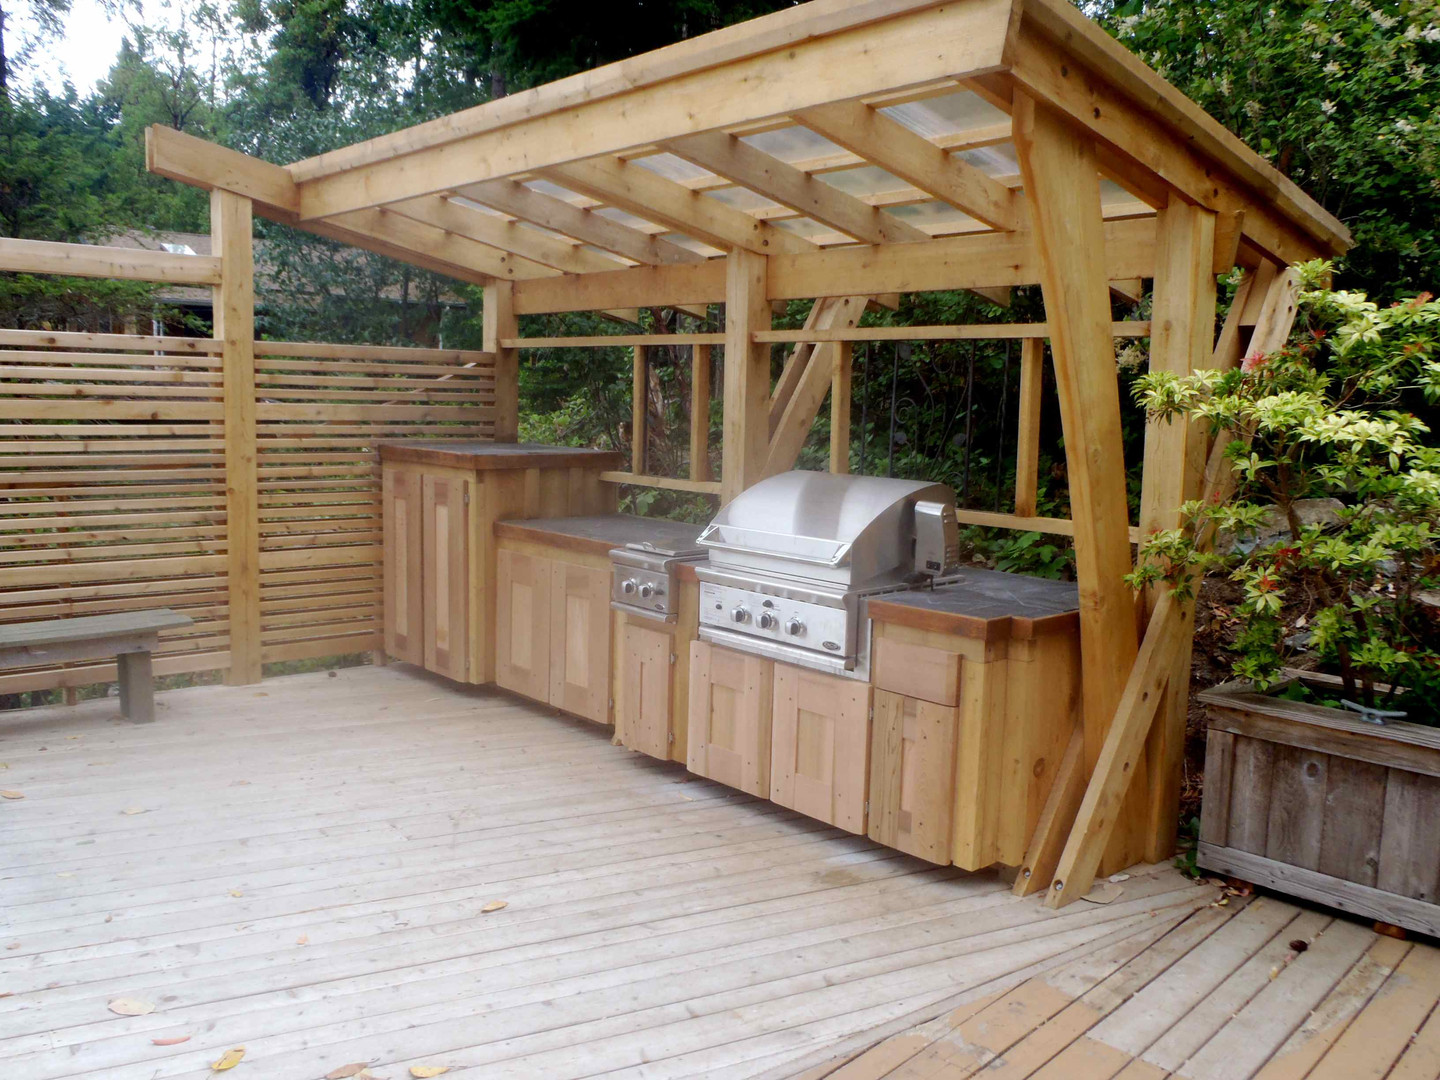 Outdoor Kitchen Ideas Diy
 These DIY Outdoor Kitchen Plans Turn Your Backyard Into